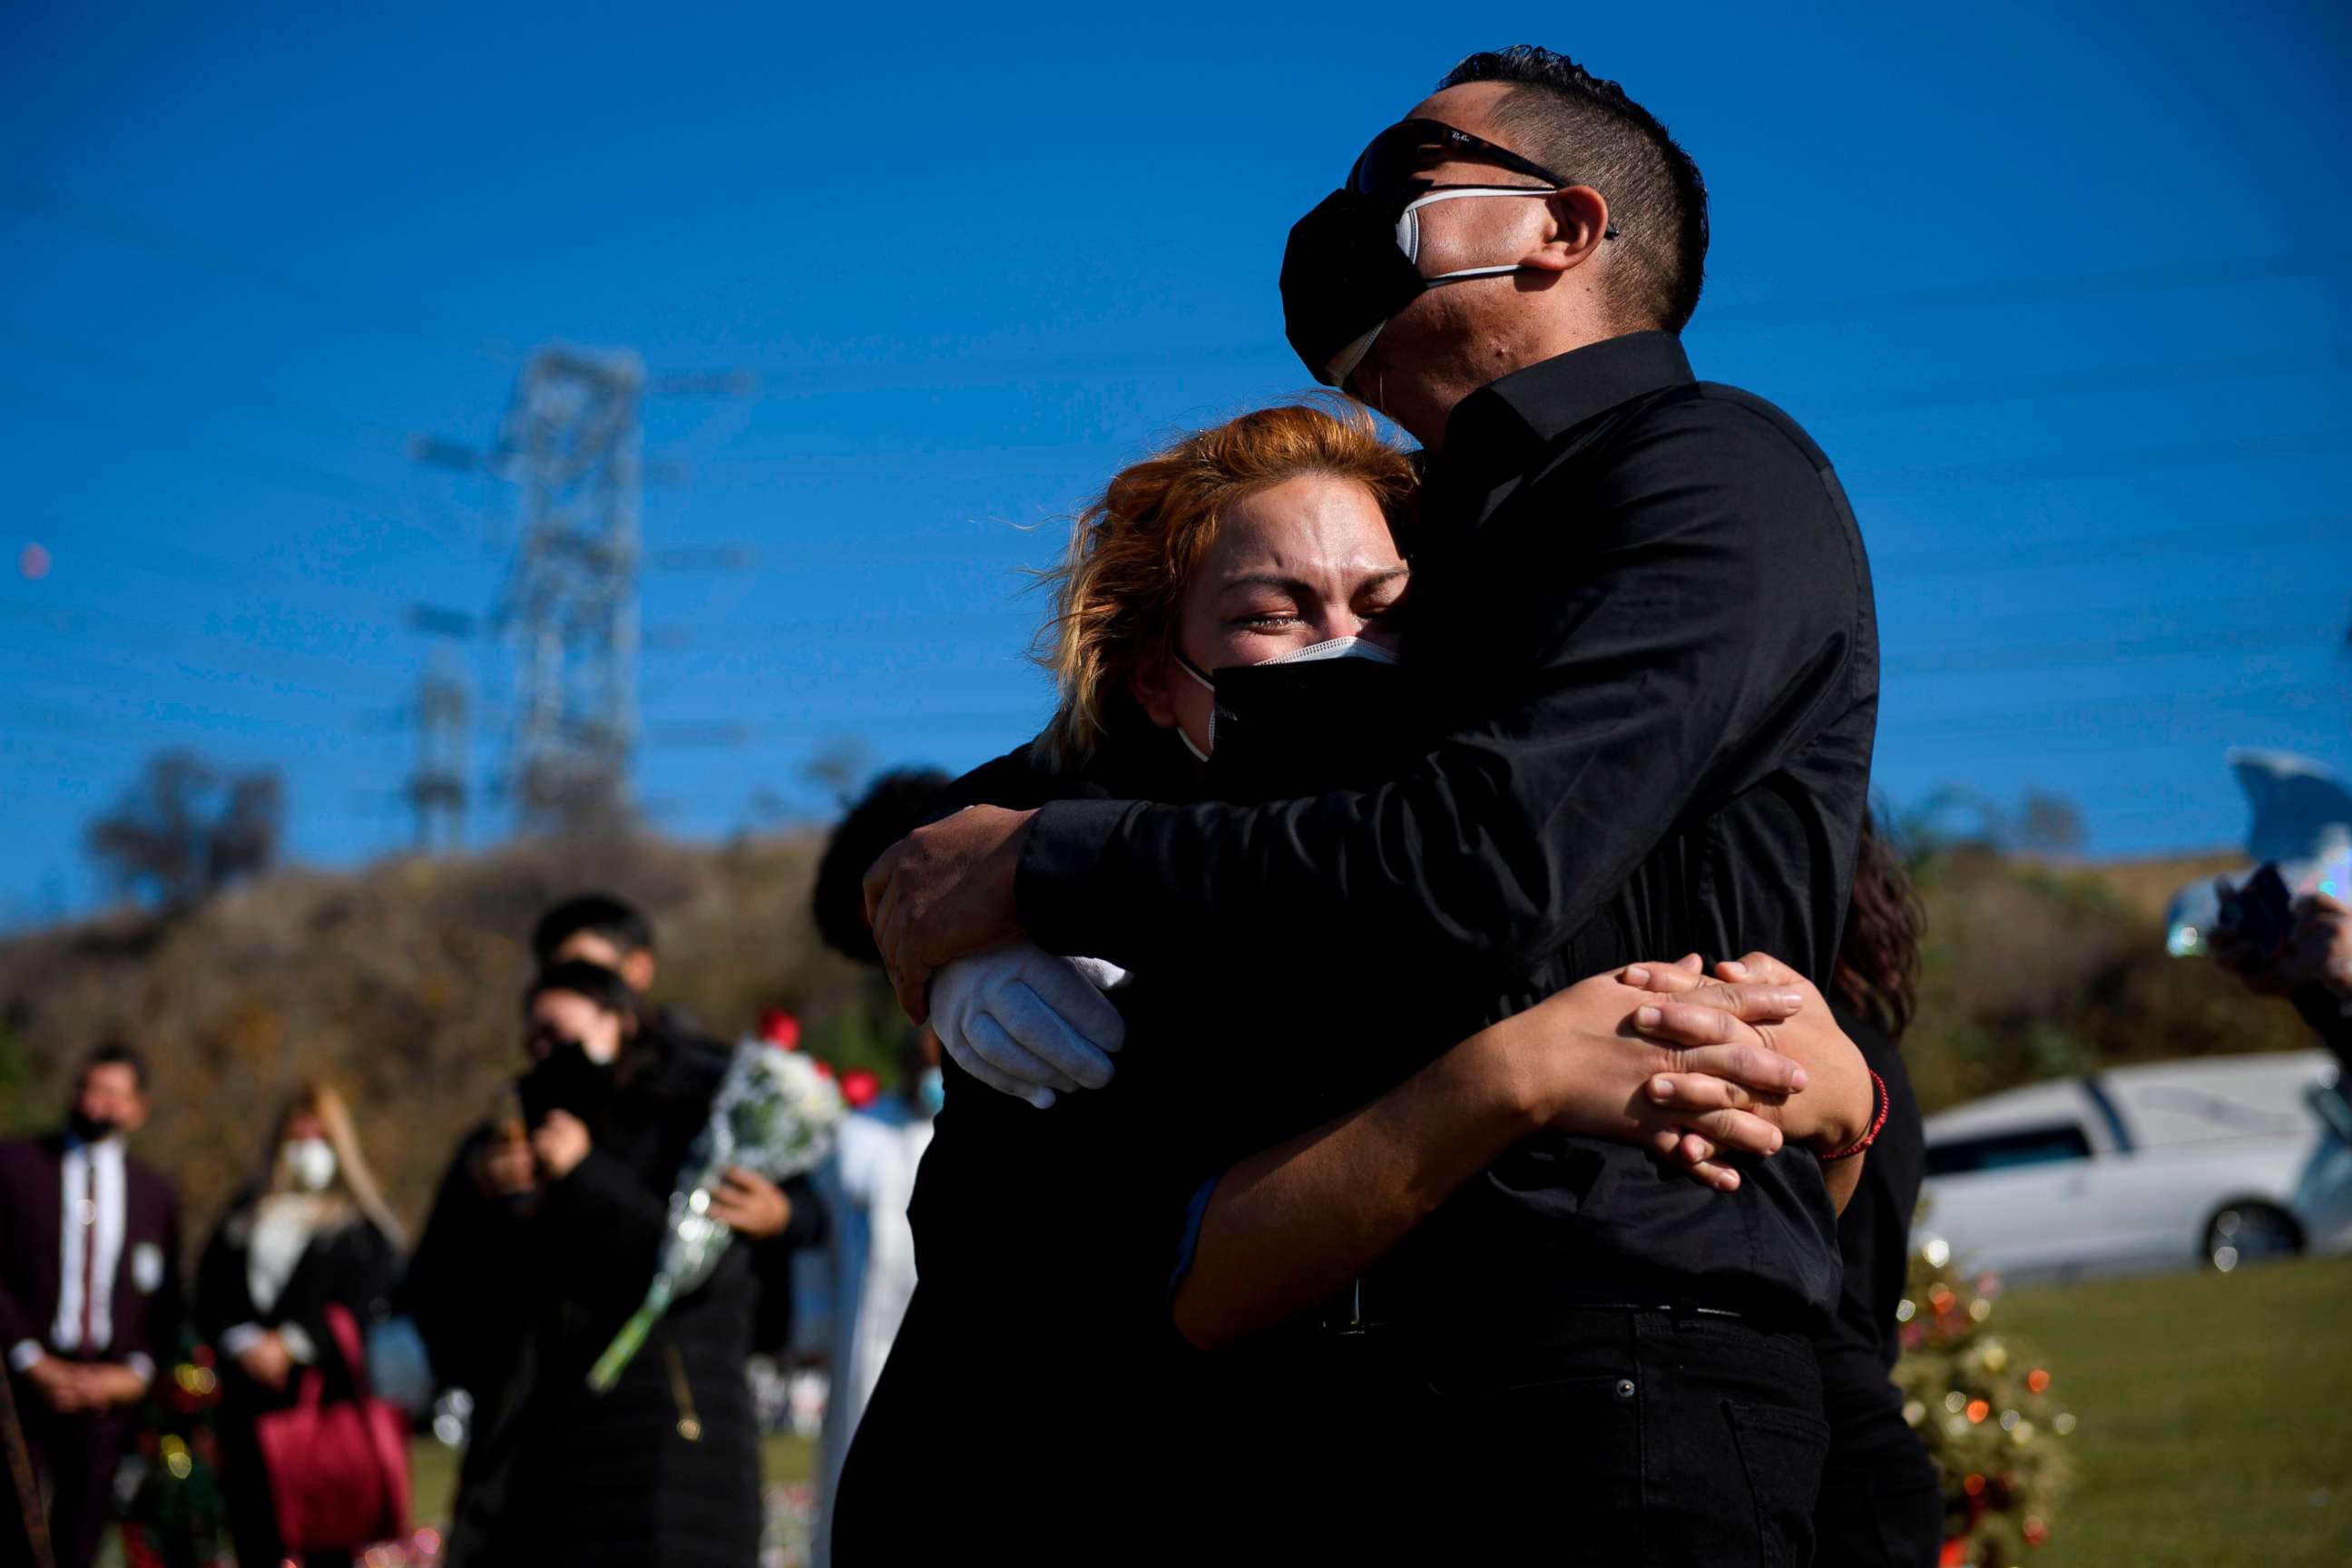 PHOTO: Maricela Arreguin Mejiam and her brother Nestor Arreguin mourn the death of their father Gilberto Arreguin Camacho, 58, due to Covid-19 during his burial at a cemetery on New Year's Eve, Dec. 31, 2020, in Whittier, Calif.